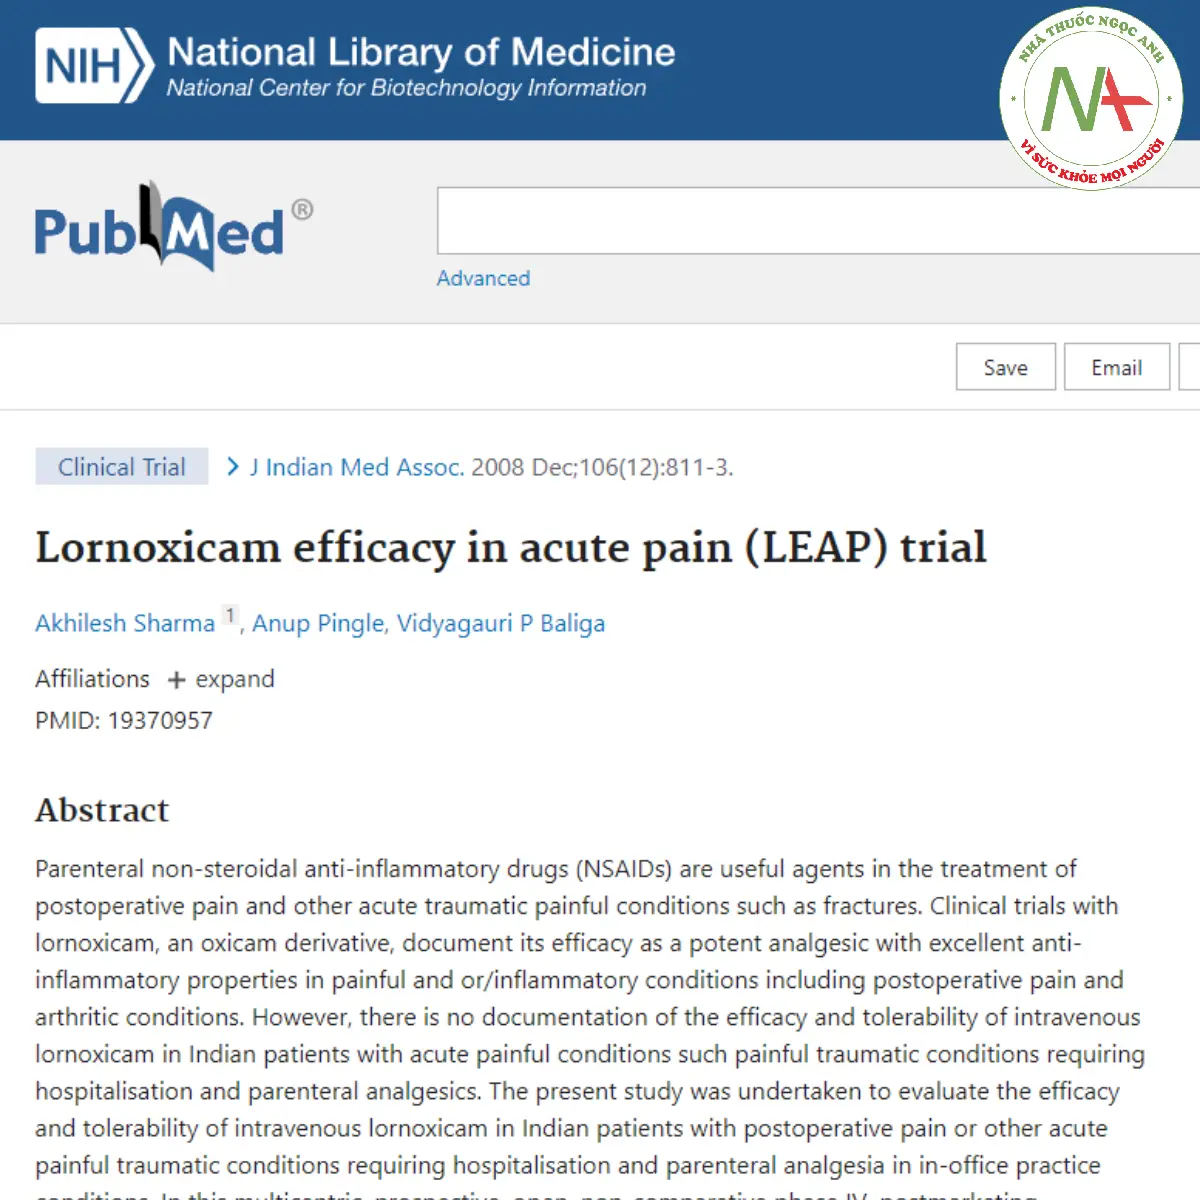 Lornoxicam efficacy in acute pain (LEAP) trial